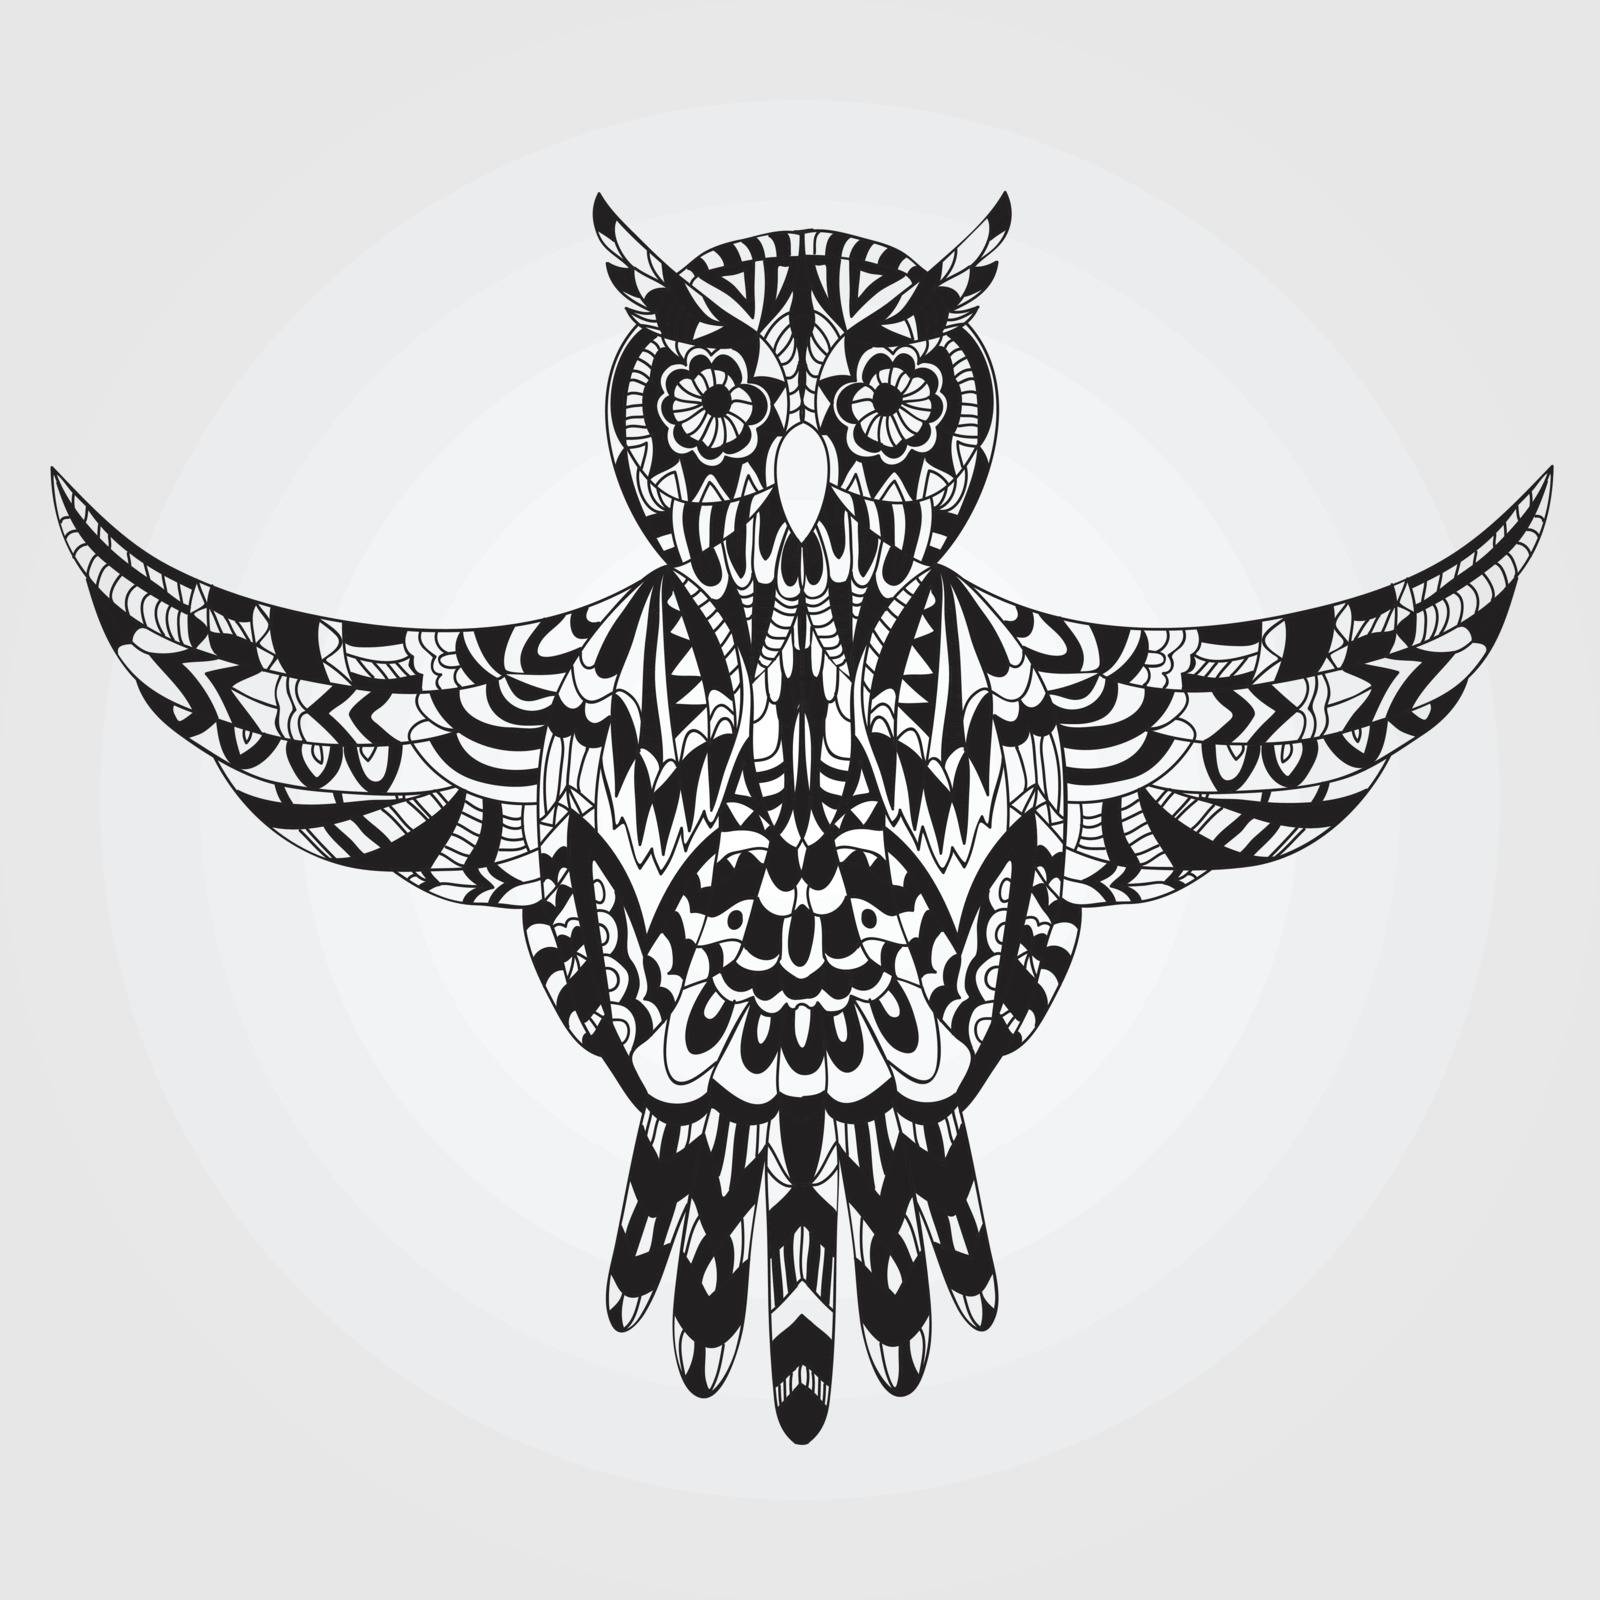 Ornamental hand drawn owl -  Vector illustration - doodle style